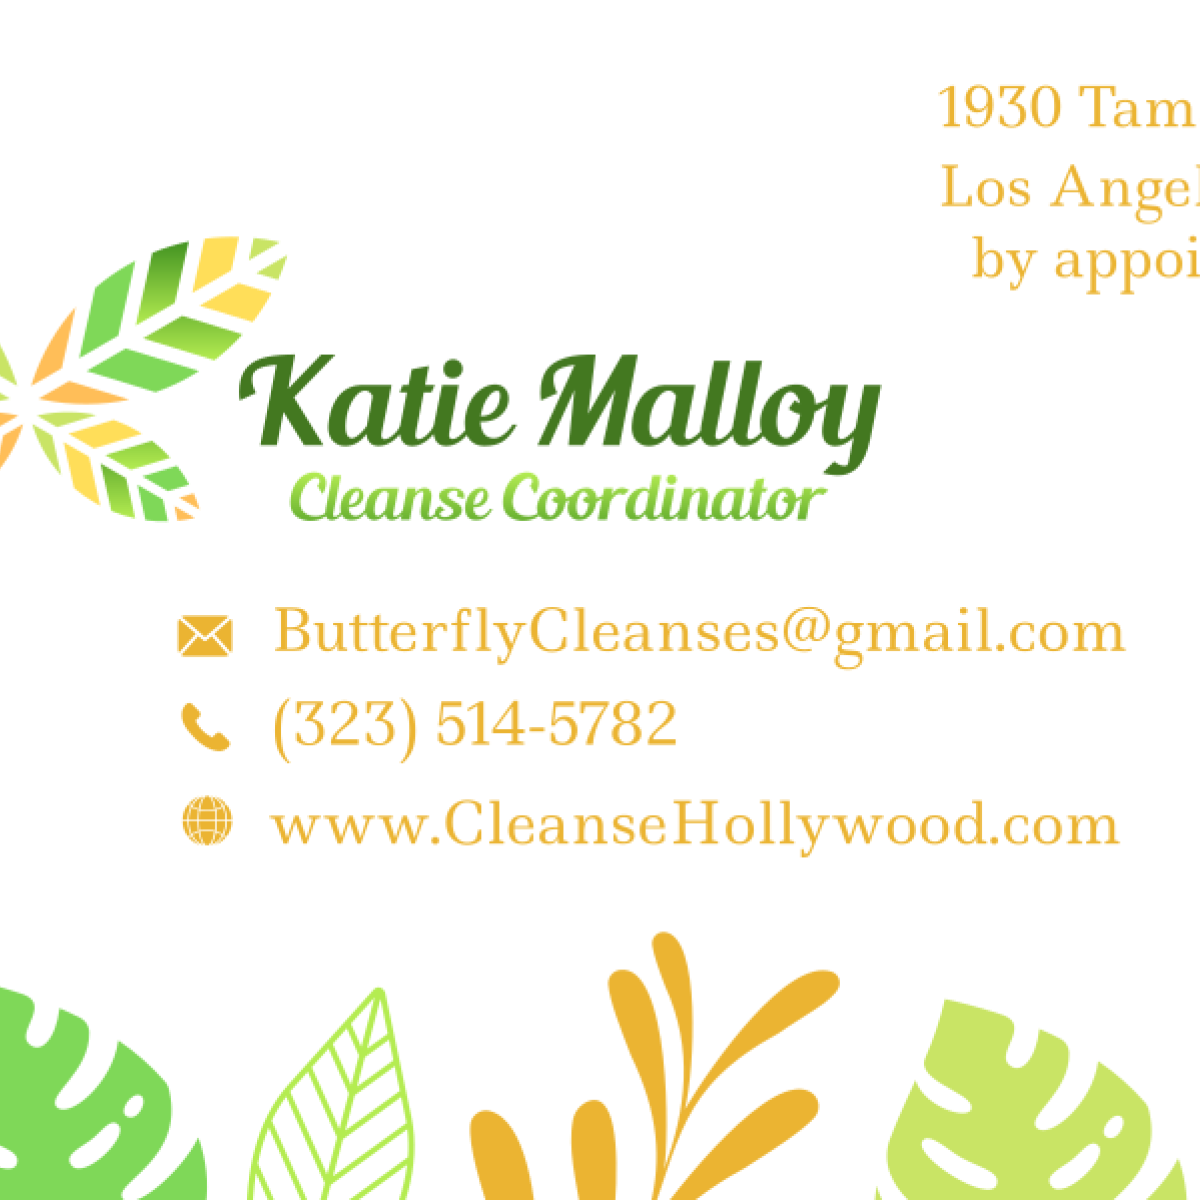 Main image for profile titled Katie Malloy